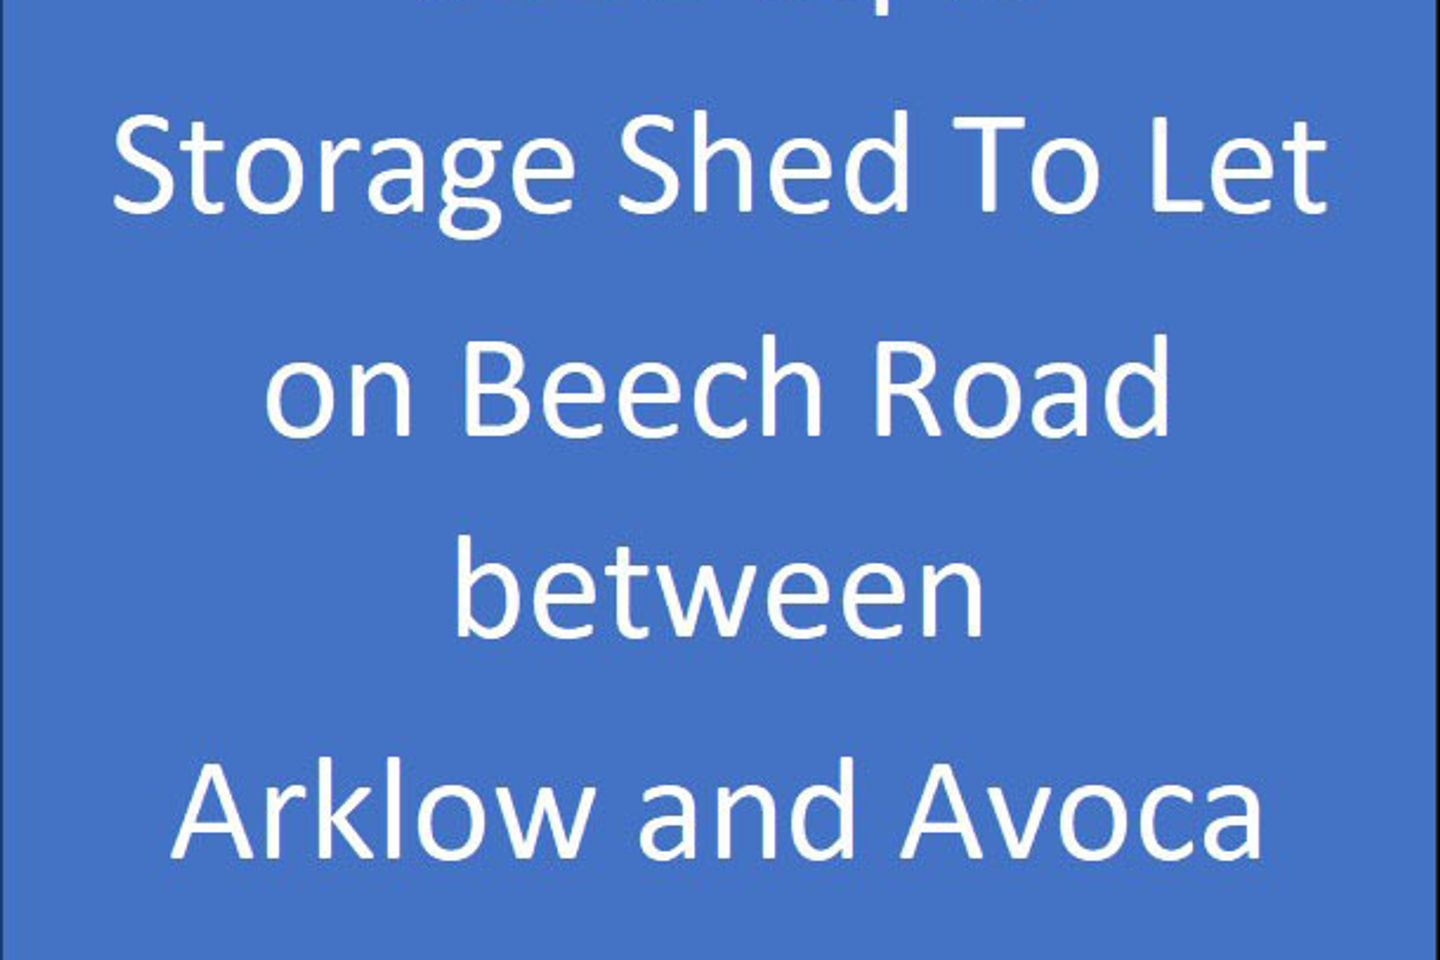 9000 sq ft Shed for storage between Arklow and Avoca, Arklow, Co. Wicklow